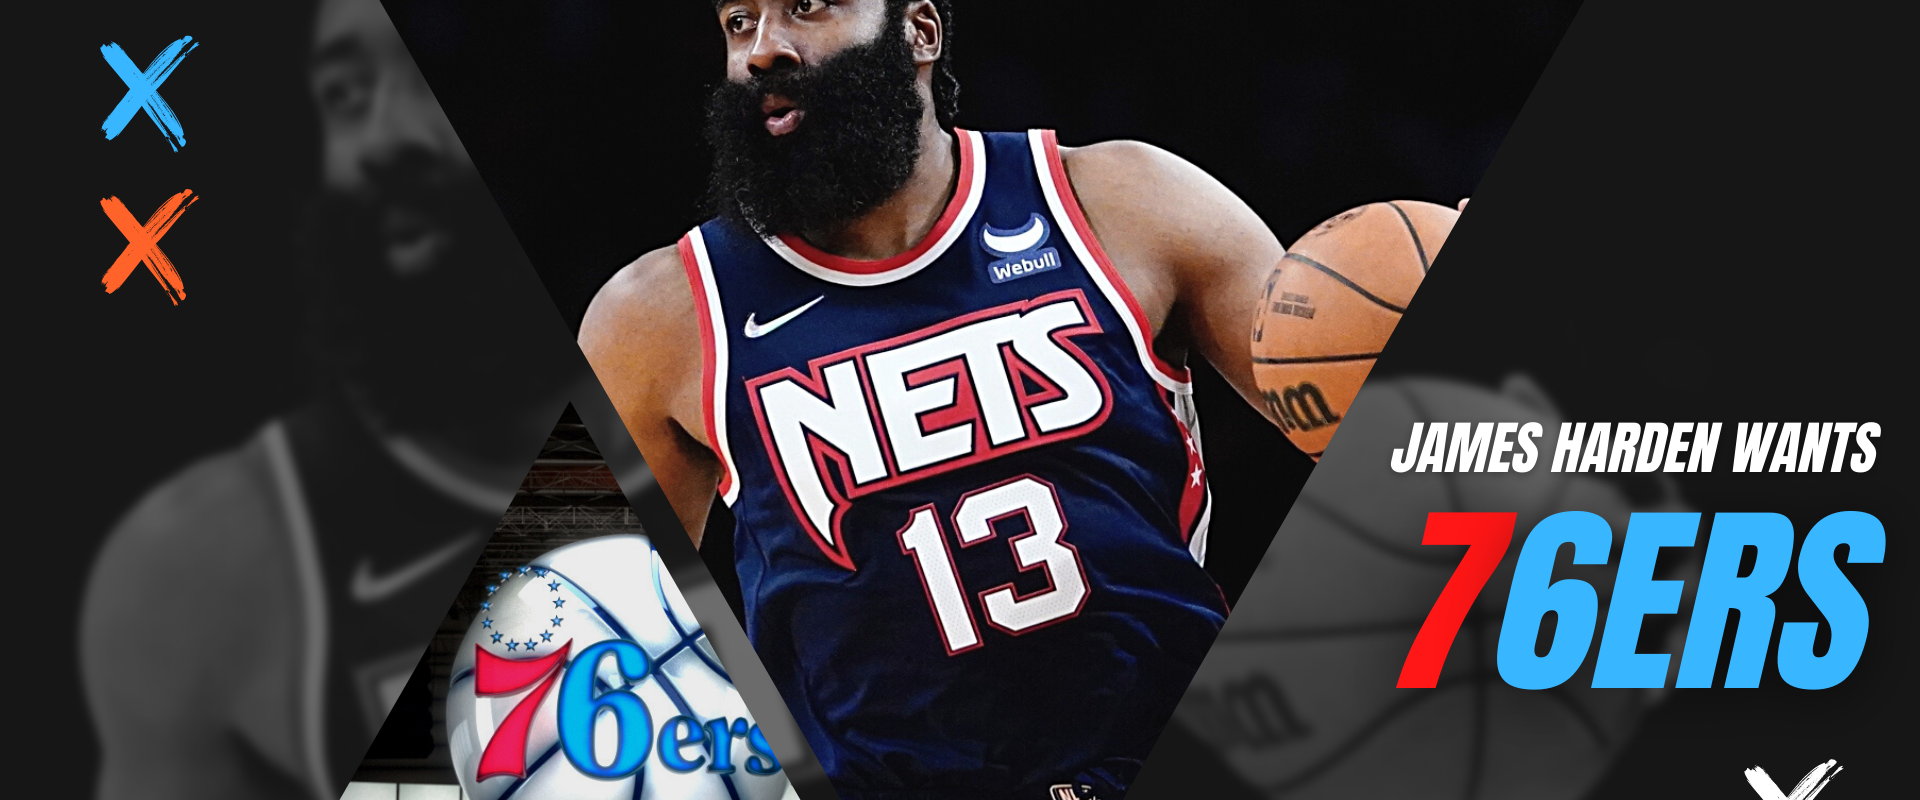 1920x1080_James Harden Wants to Leave for Philadelphia But Hesitates to Say Publicly-Ron